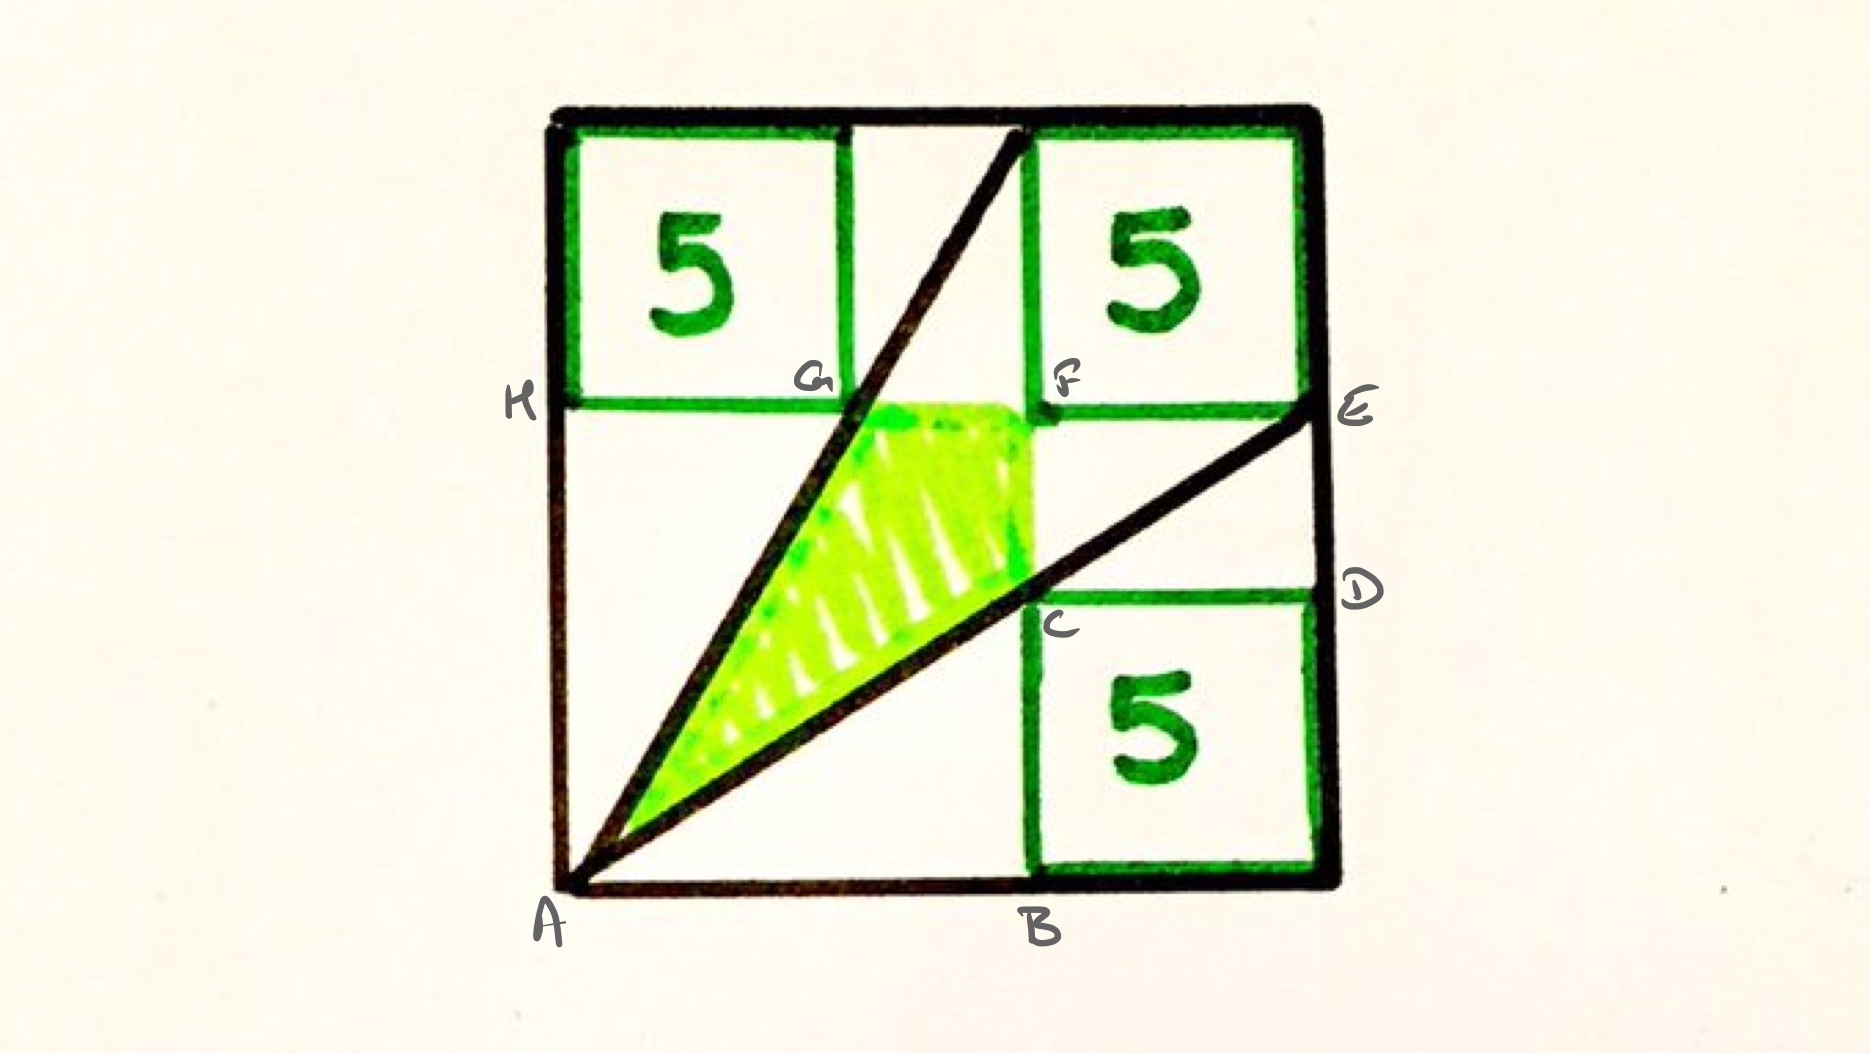 Three squares in a square labelled